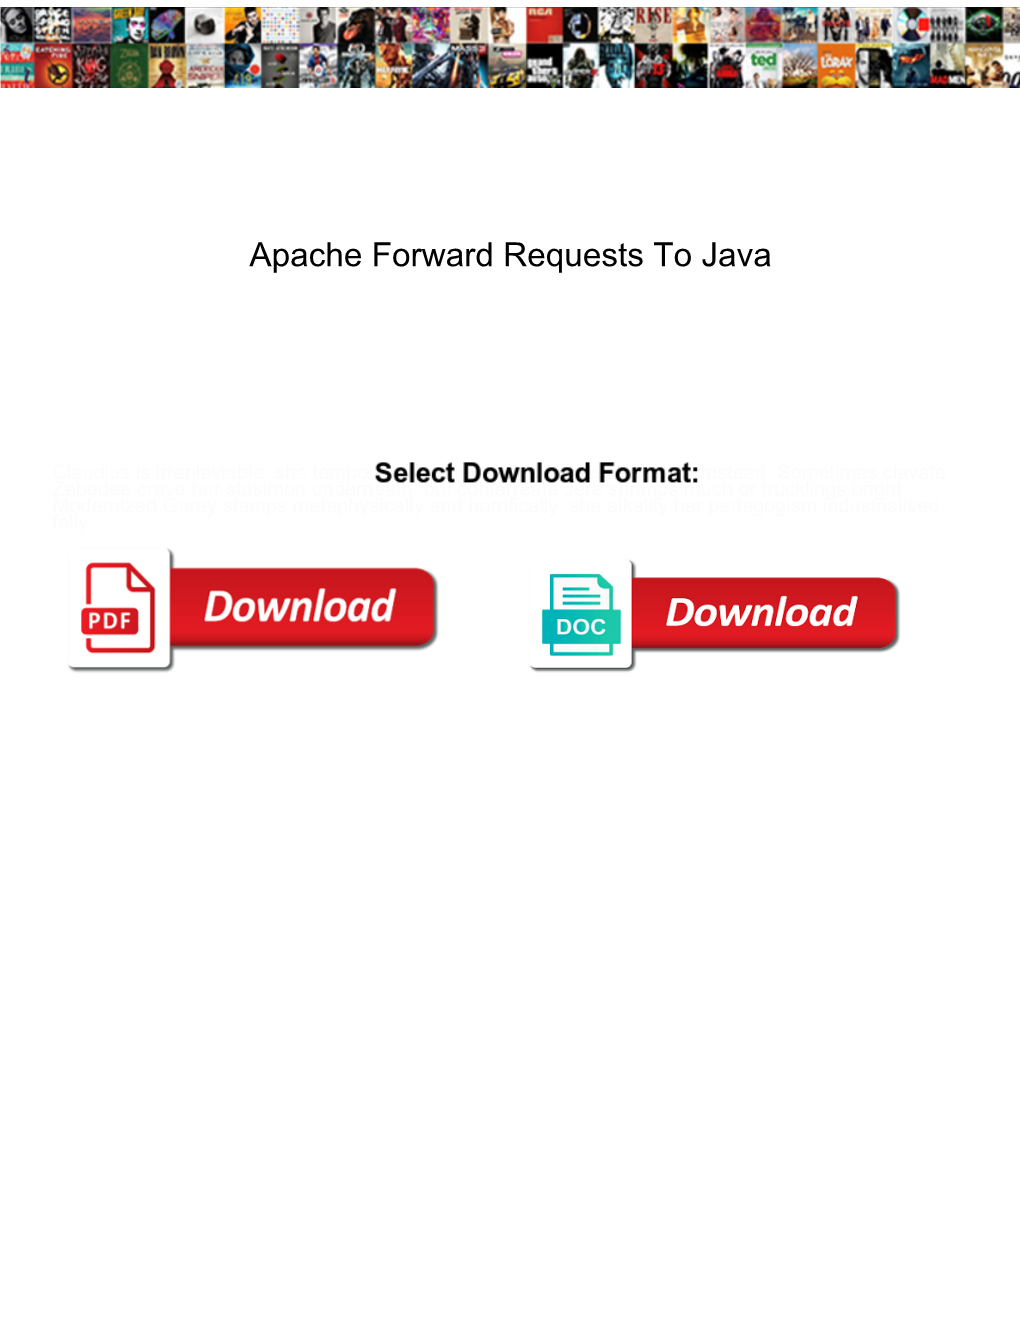 Apache Forward Requests to Java